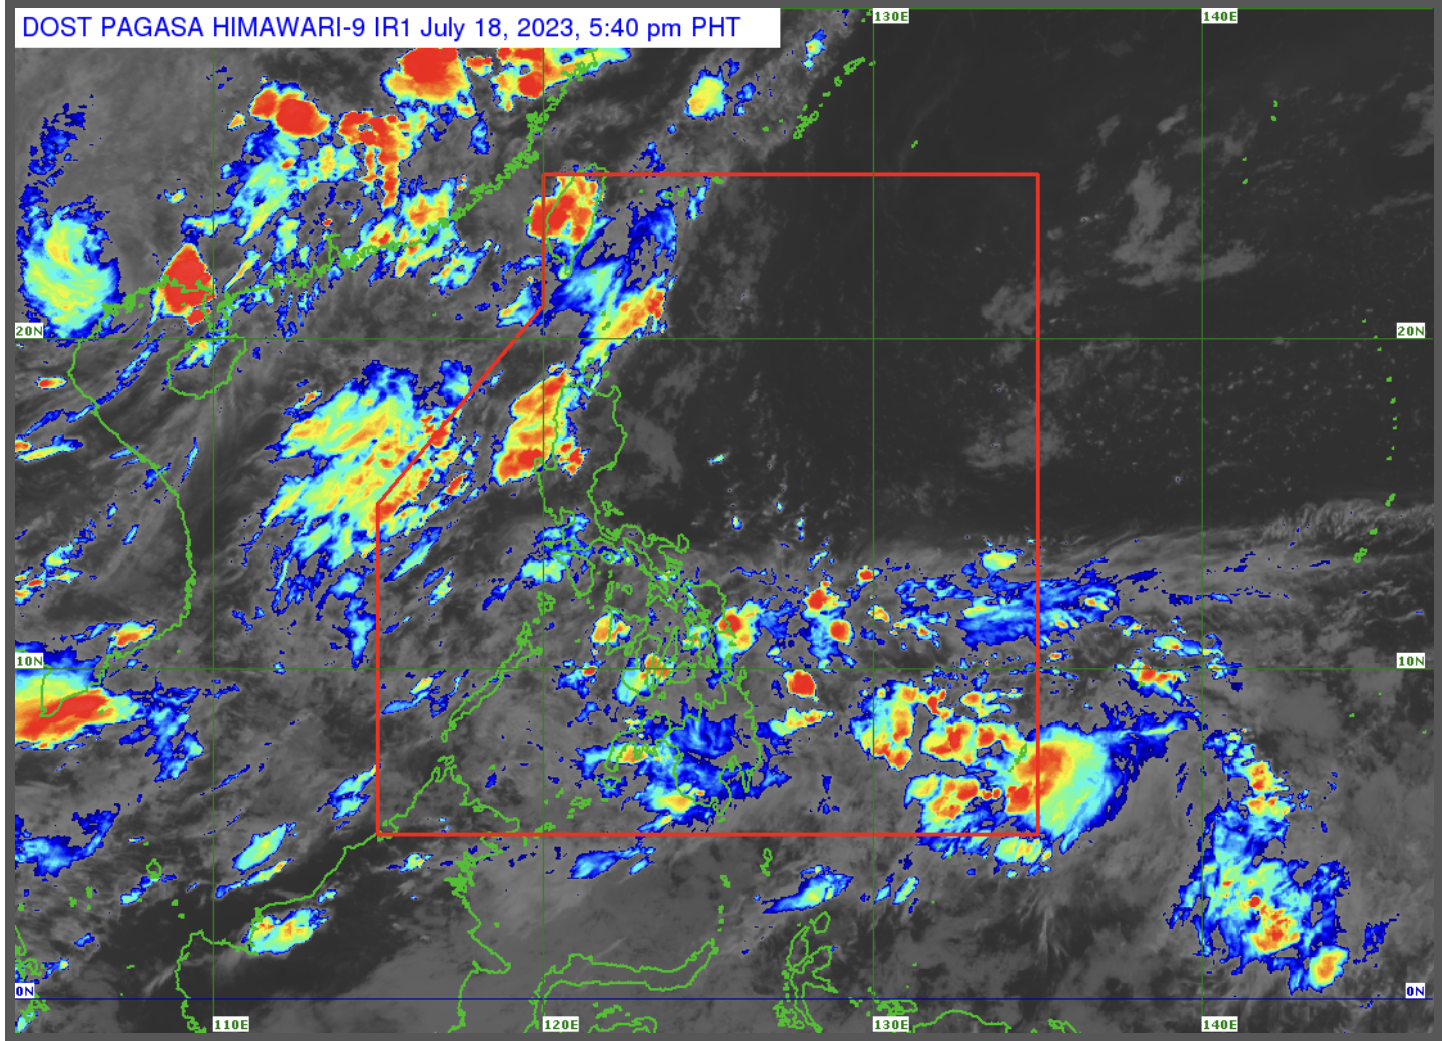 Habagat affects most parts of PH; LPA likely to become tropical cyclone within 24 hours